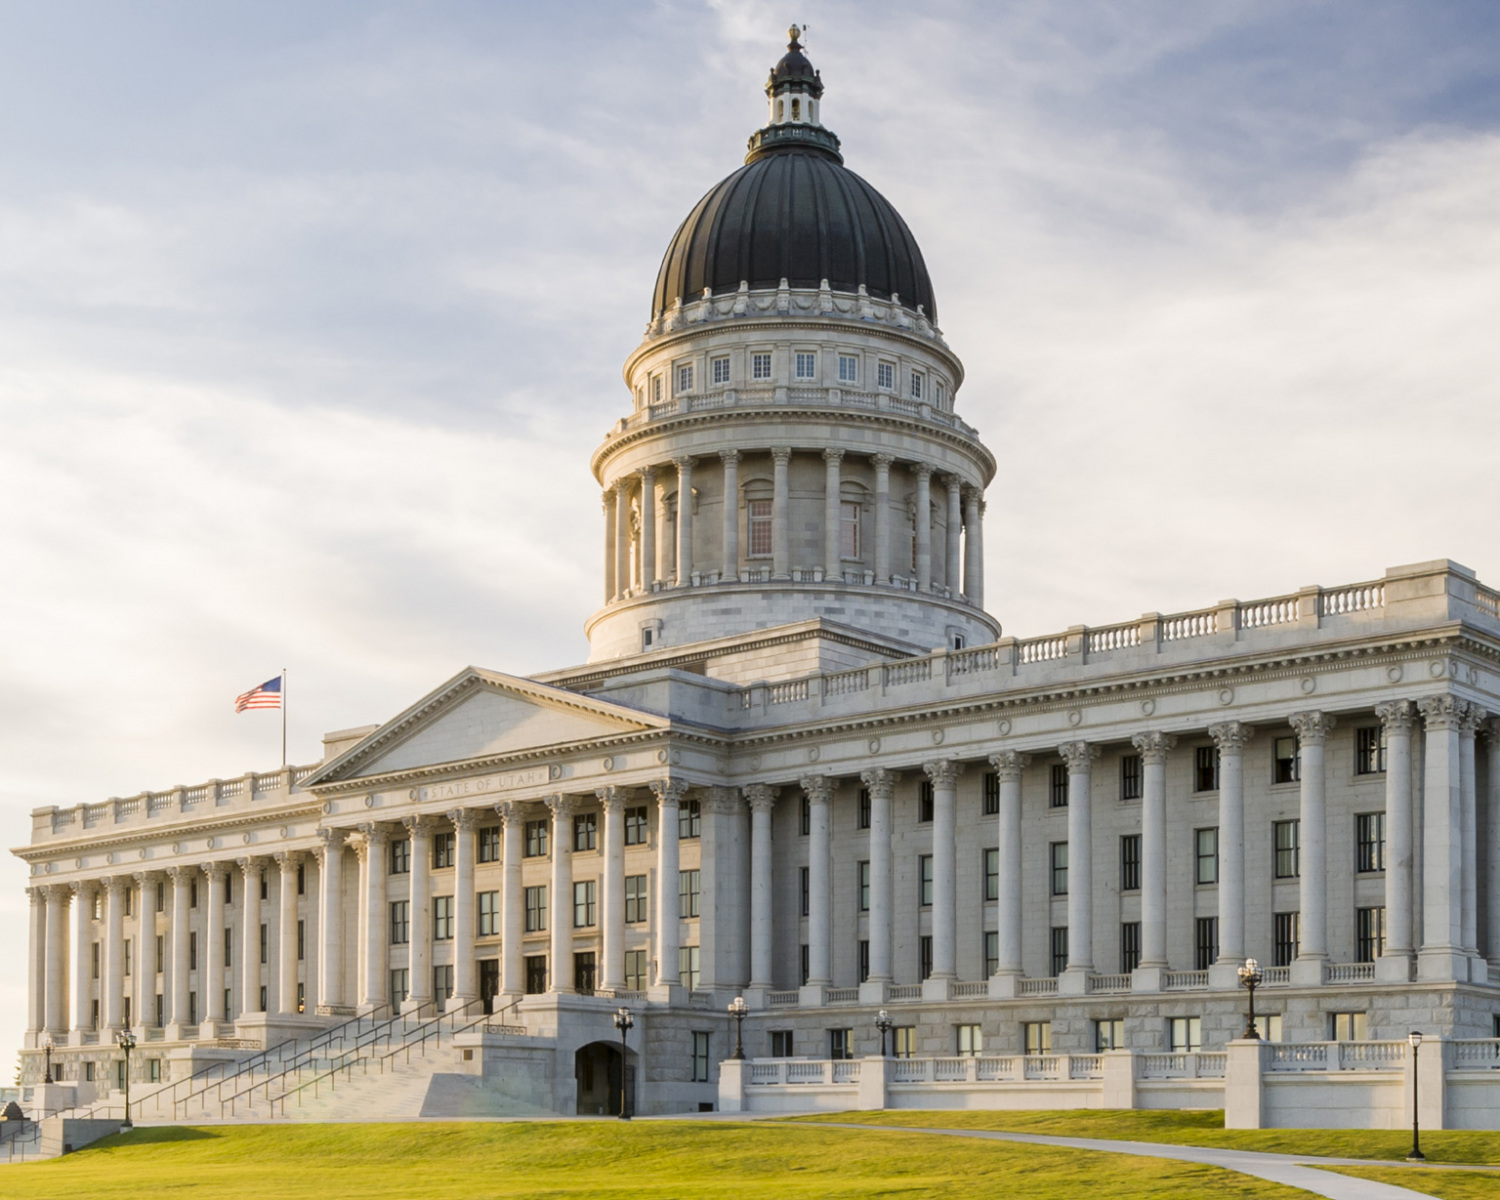 A photo of the Utah State Capitol in Salt Lake City.  Designed by Richard K.A. Kletting in a Beaux-Arts Classical Revival style, the building was constructed between 1912 and 1916.  The Utah State Capitol, which underwent extensive renovations in the mid-2000s, is listed on the National Register of Historic Places.  This photo © Capitolshots Photography/TwoFiftyFour Photos, LLC, ALL RIGHTS RESERVED.